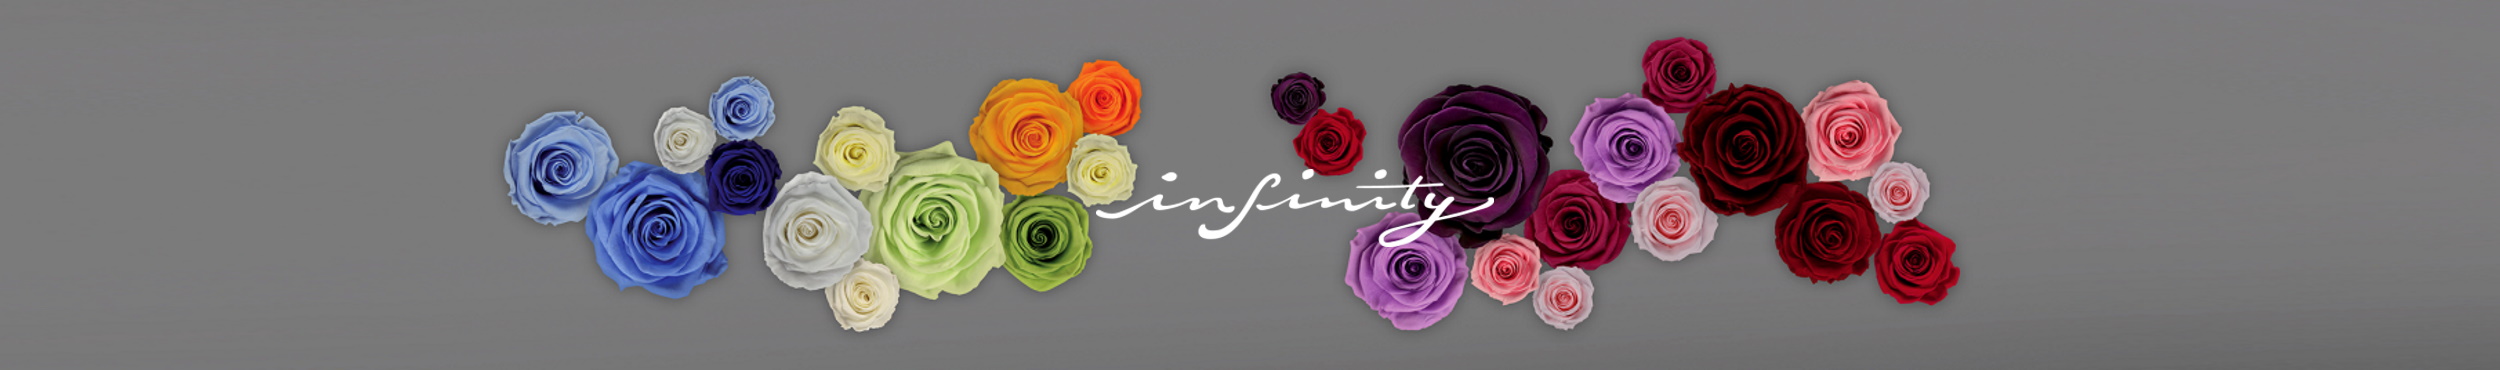 header image for infinity products